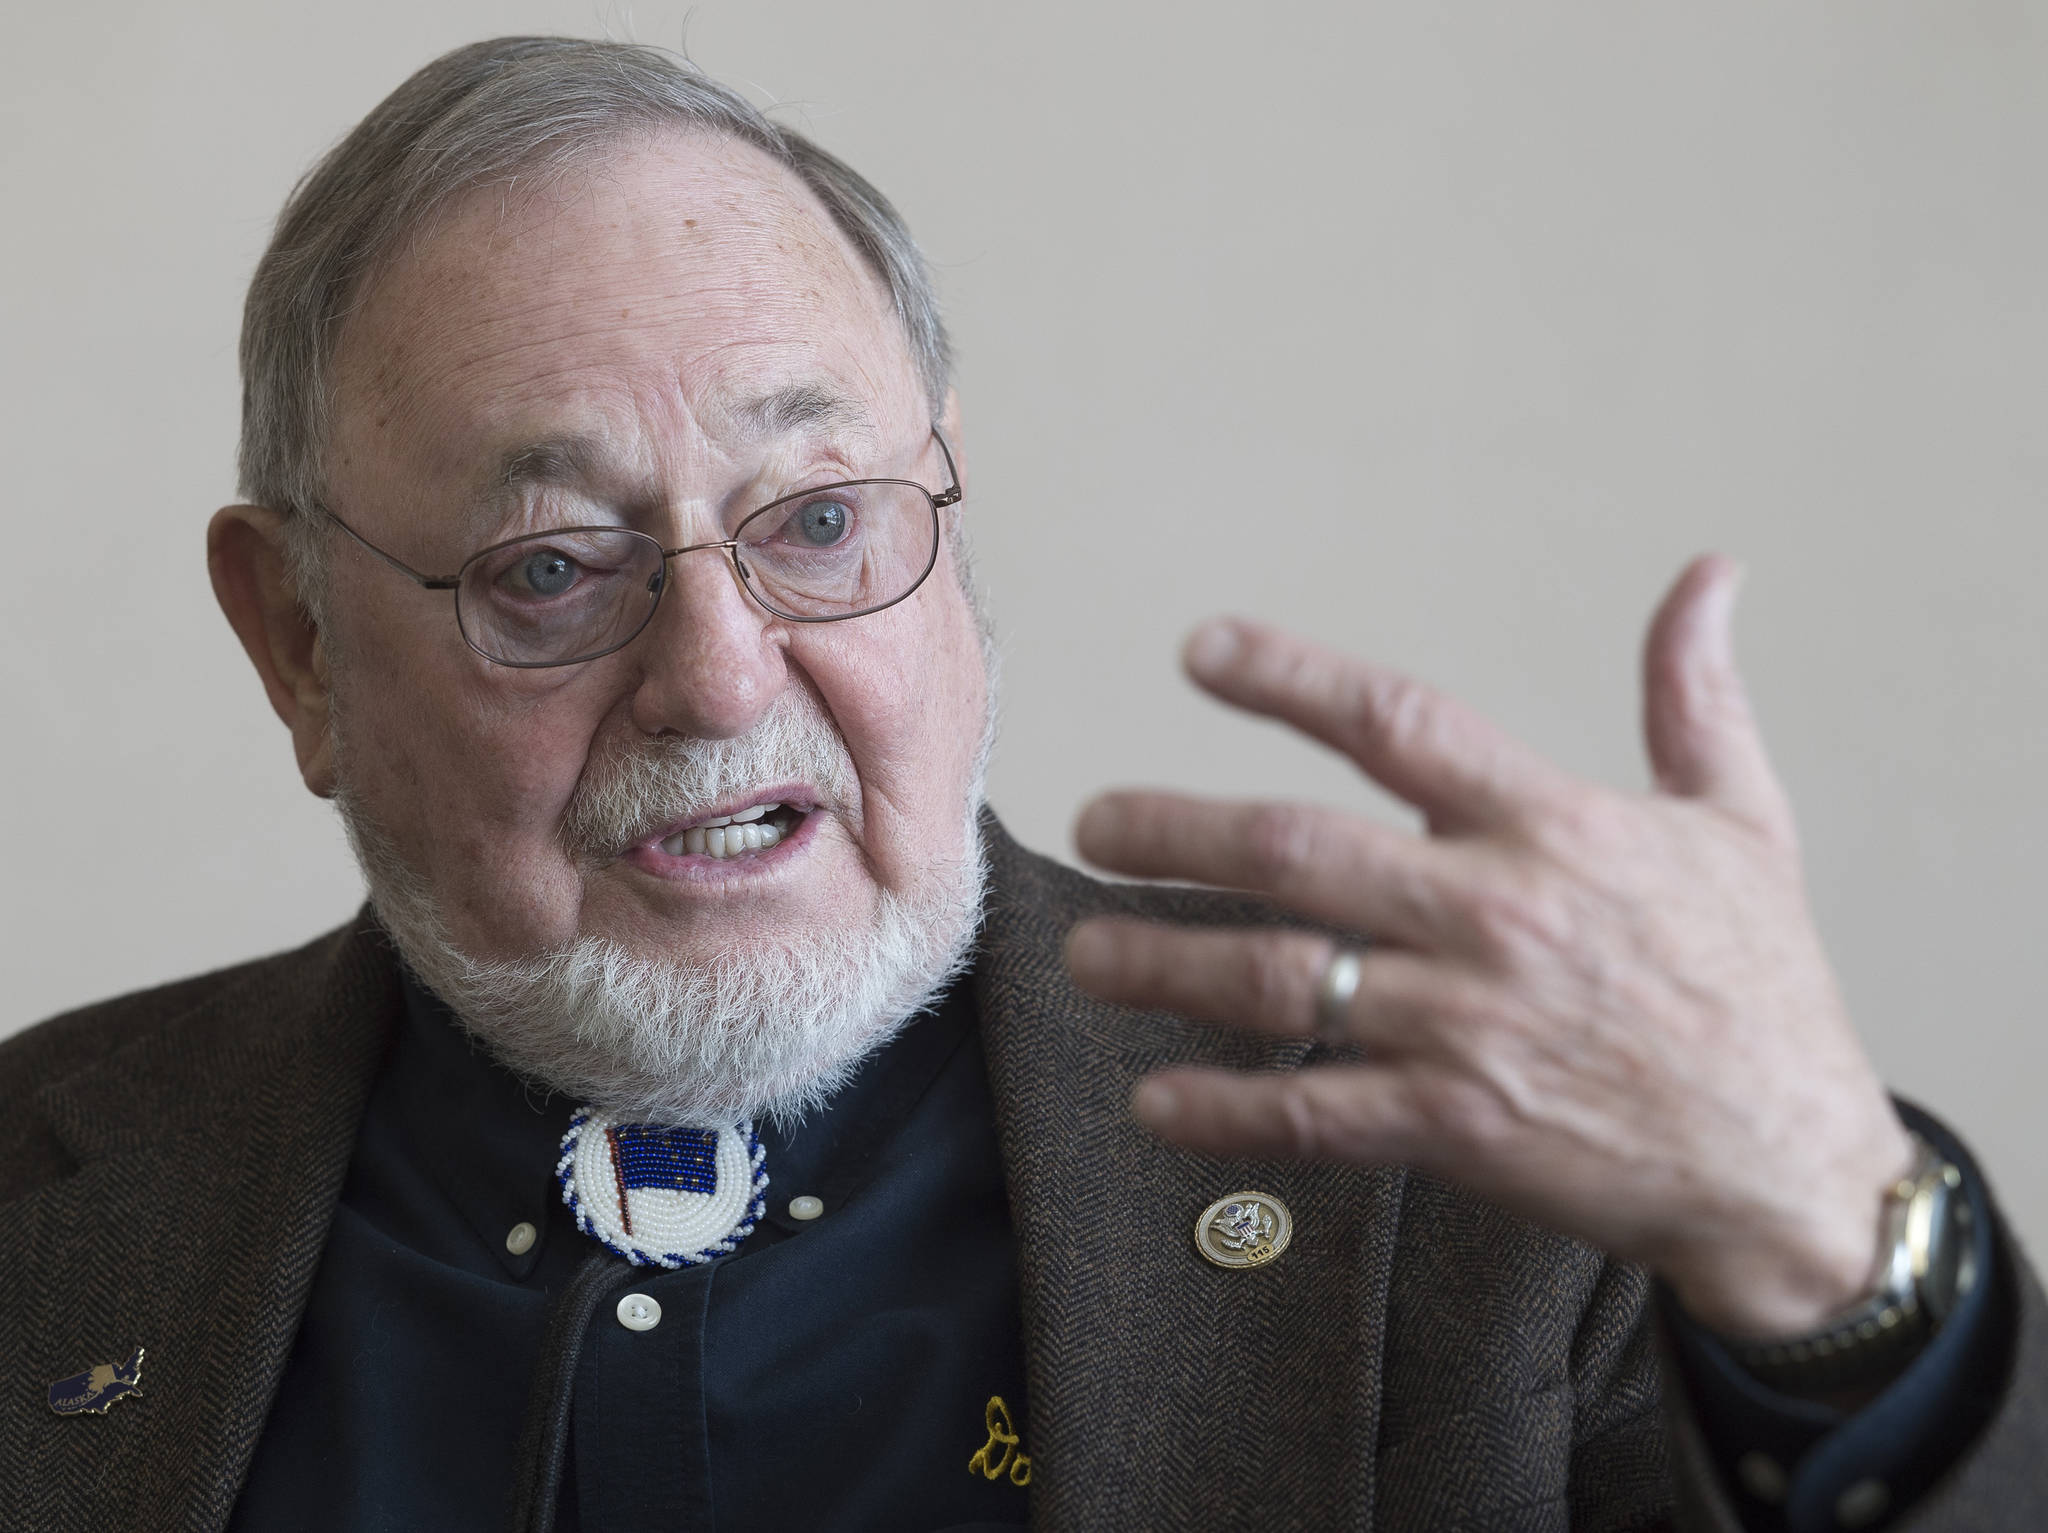 Alaska Rep. Don Young speaks during an interview at the Juneau Empire on Wednesday, Feb. 21, 2018. (Michael Penn | Juneau Empire)